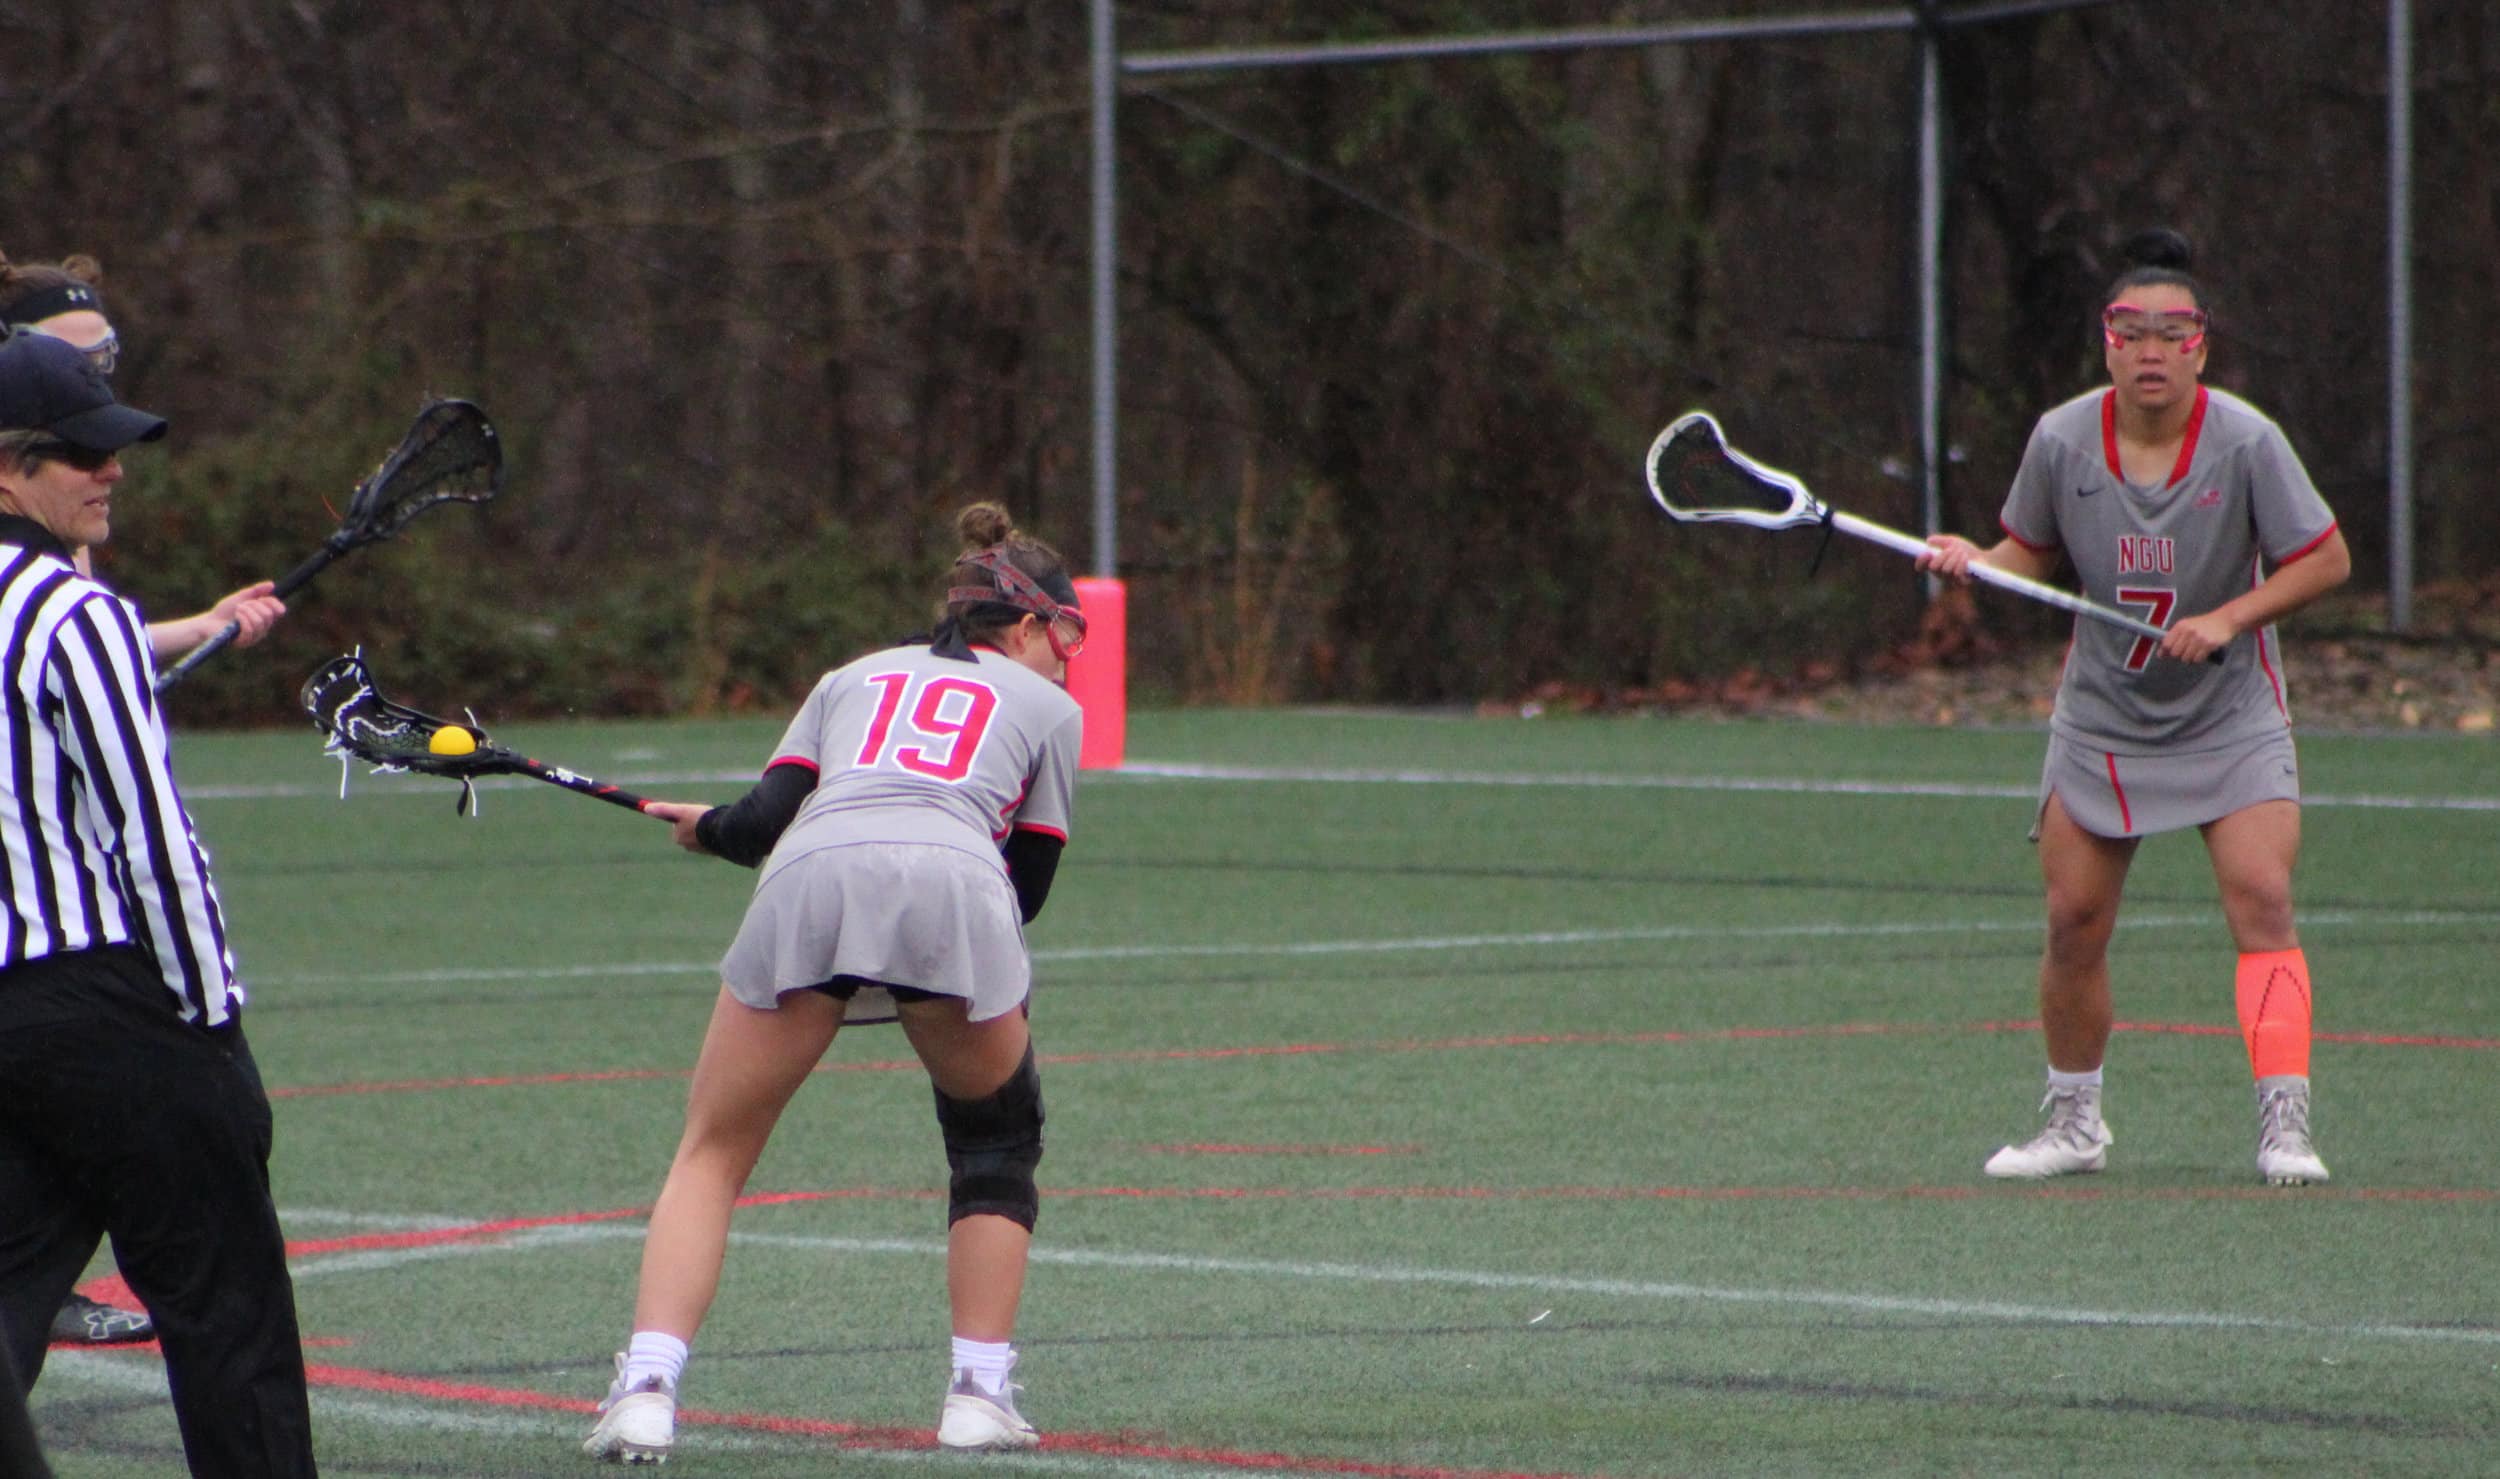 Junior, Aly Estes, 19, approaches closer to the goalie with the help of player 7.